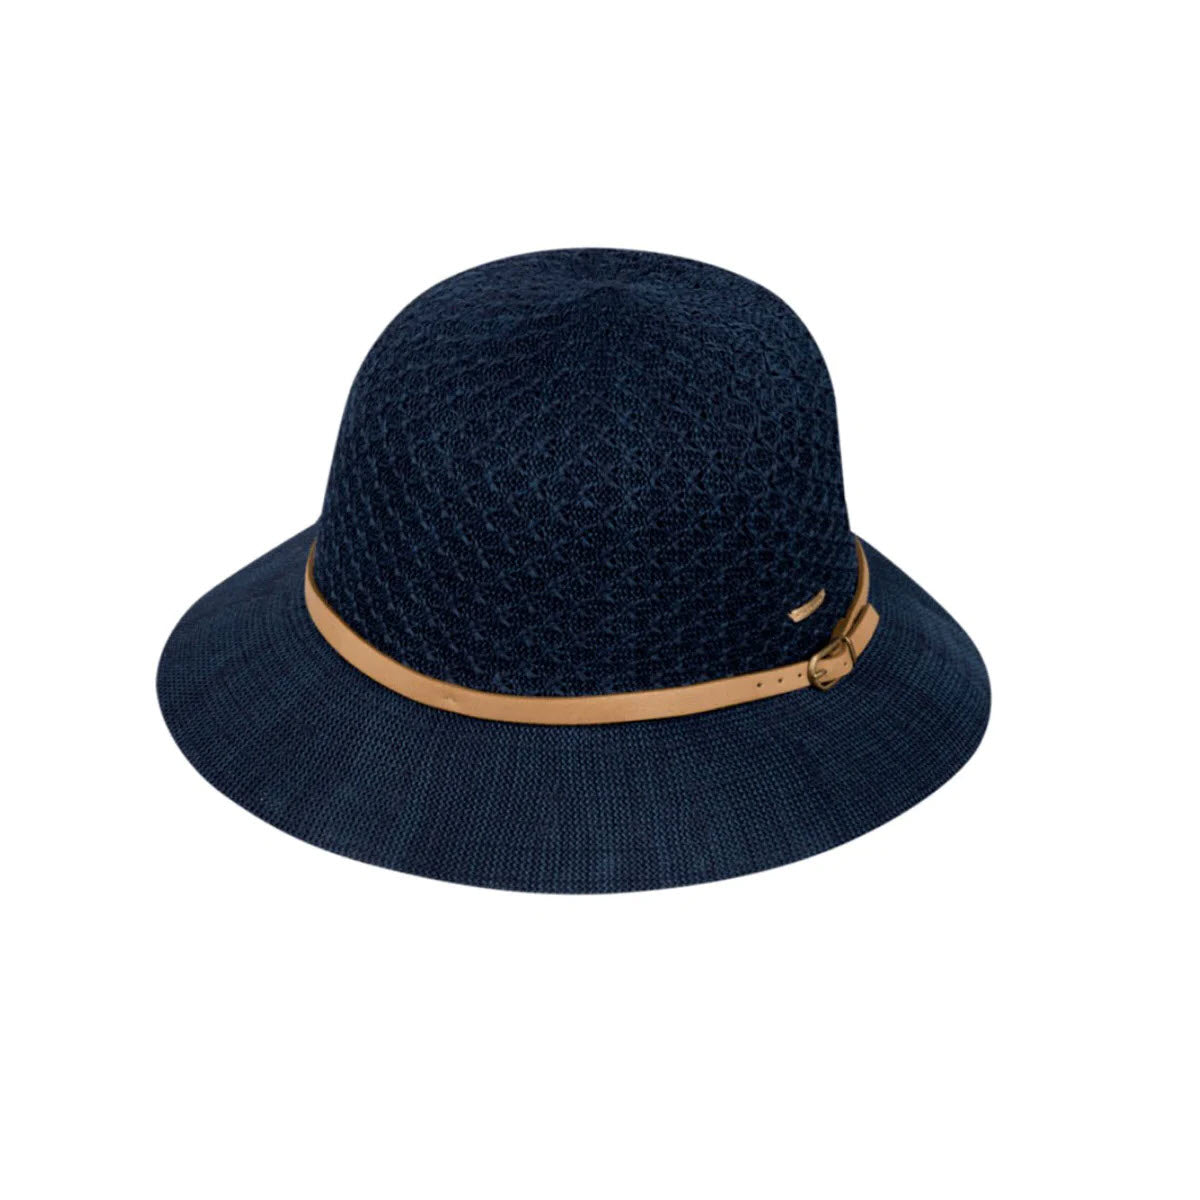 Kooringal navy blue polyester knit bucket hat with a light brown leather band isolated on a white background.